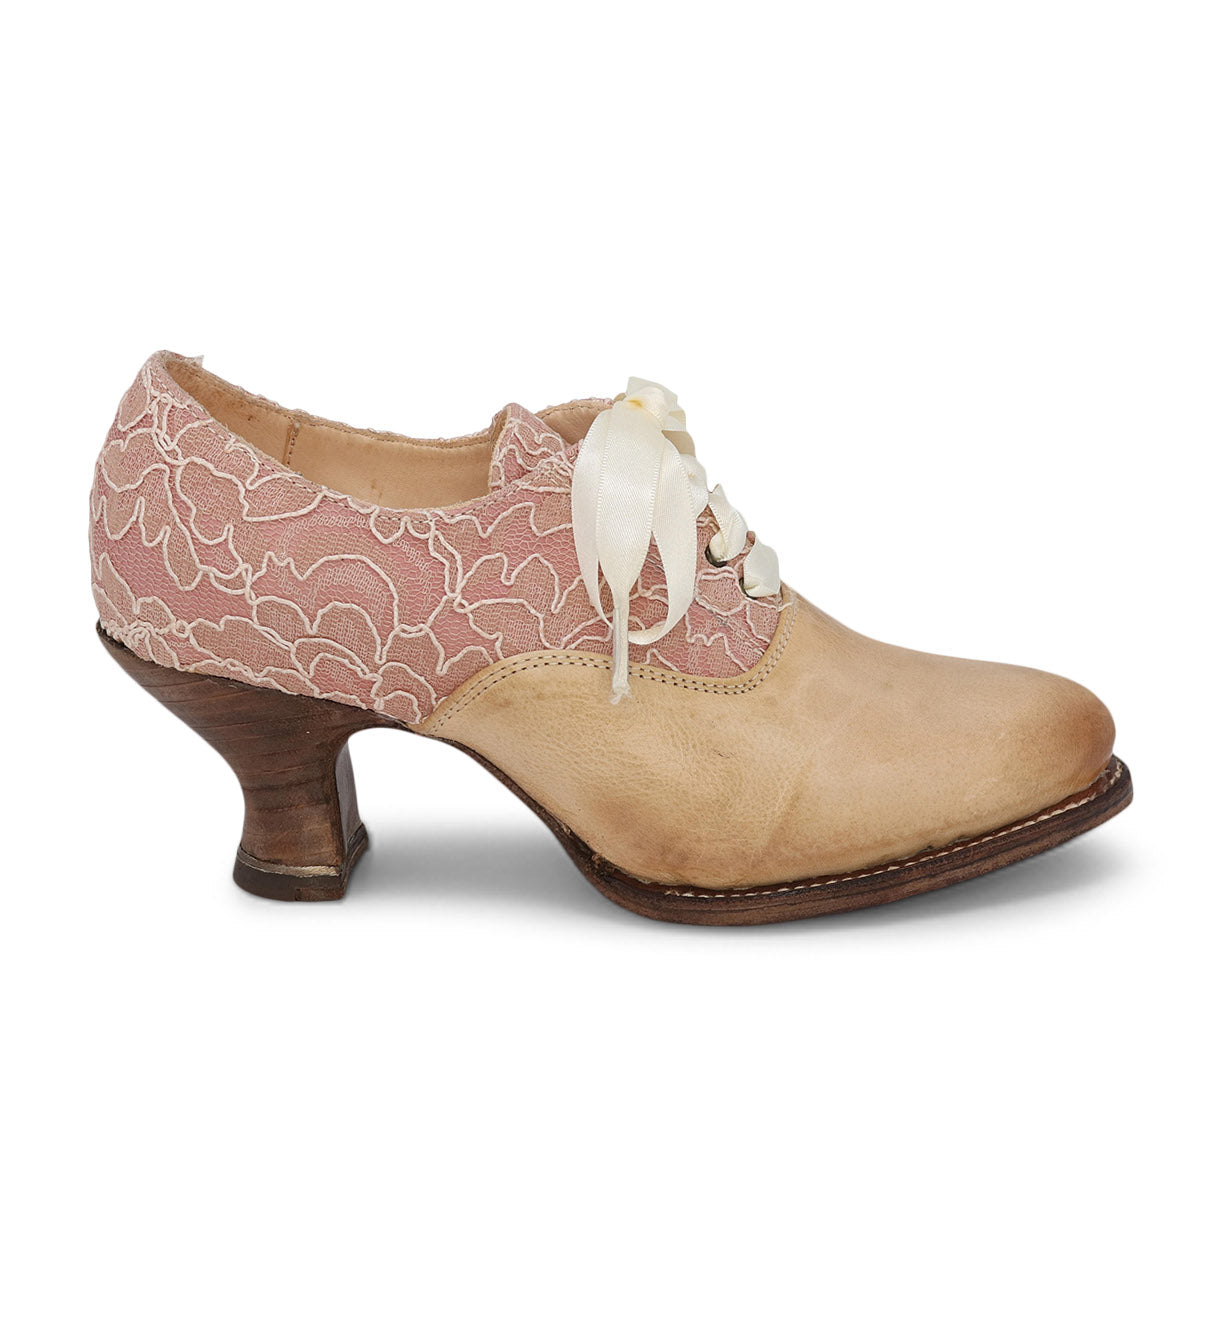 A women's lace-up leather shoe with a pink and white spooled heel, named Janet by Oak Tree Farms.